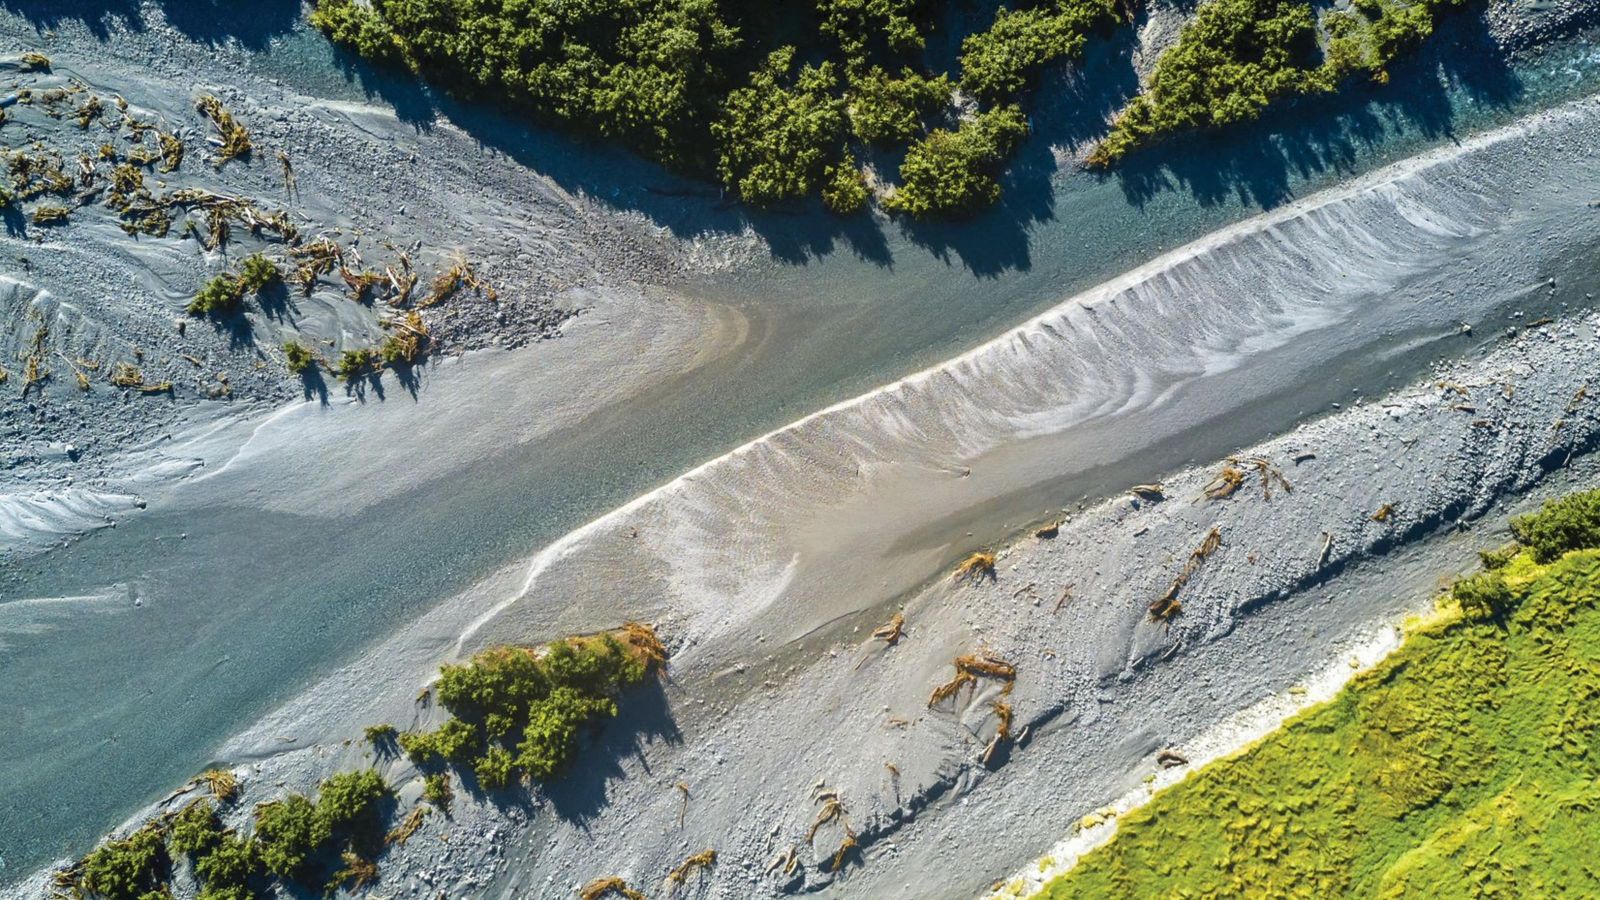 Birds eye view of a dry river bed.